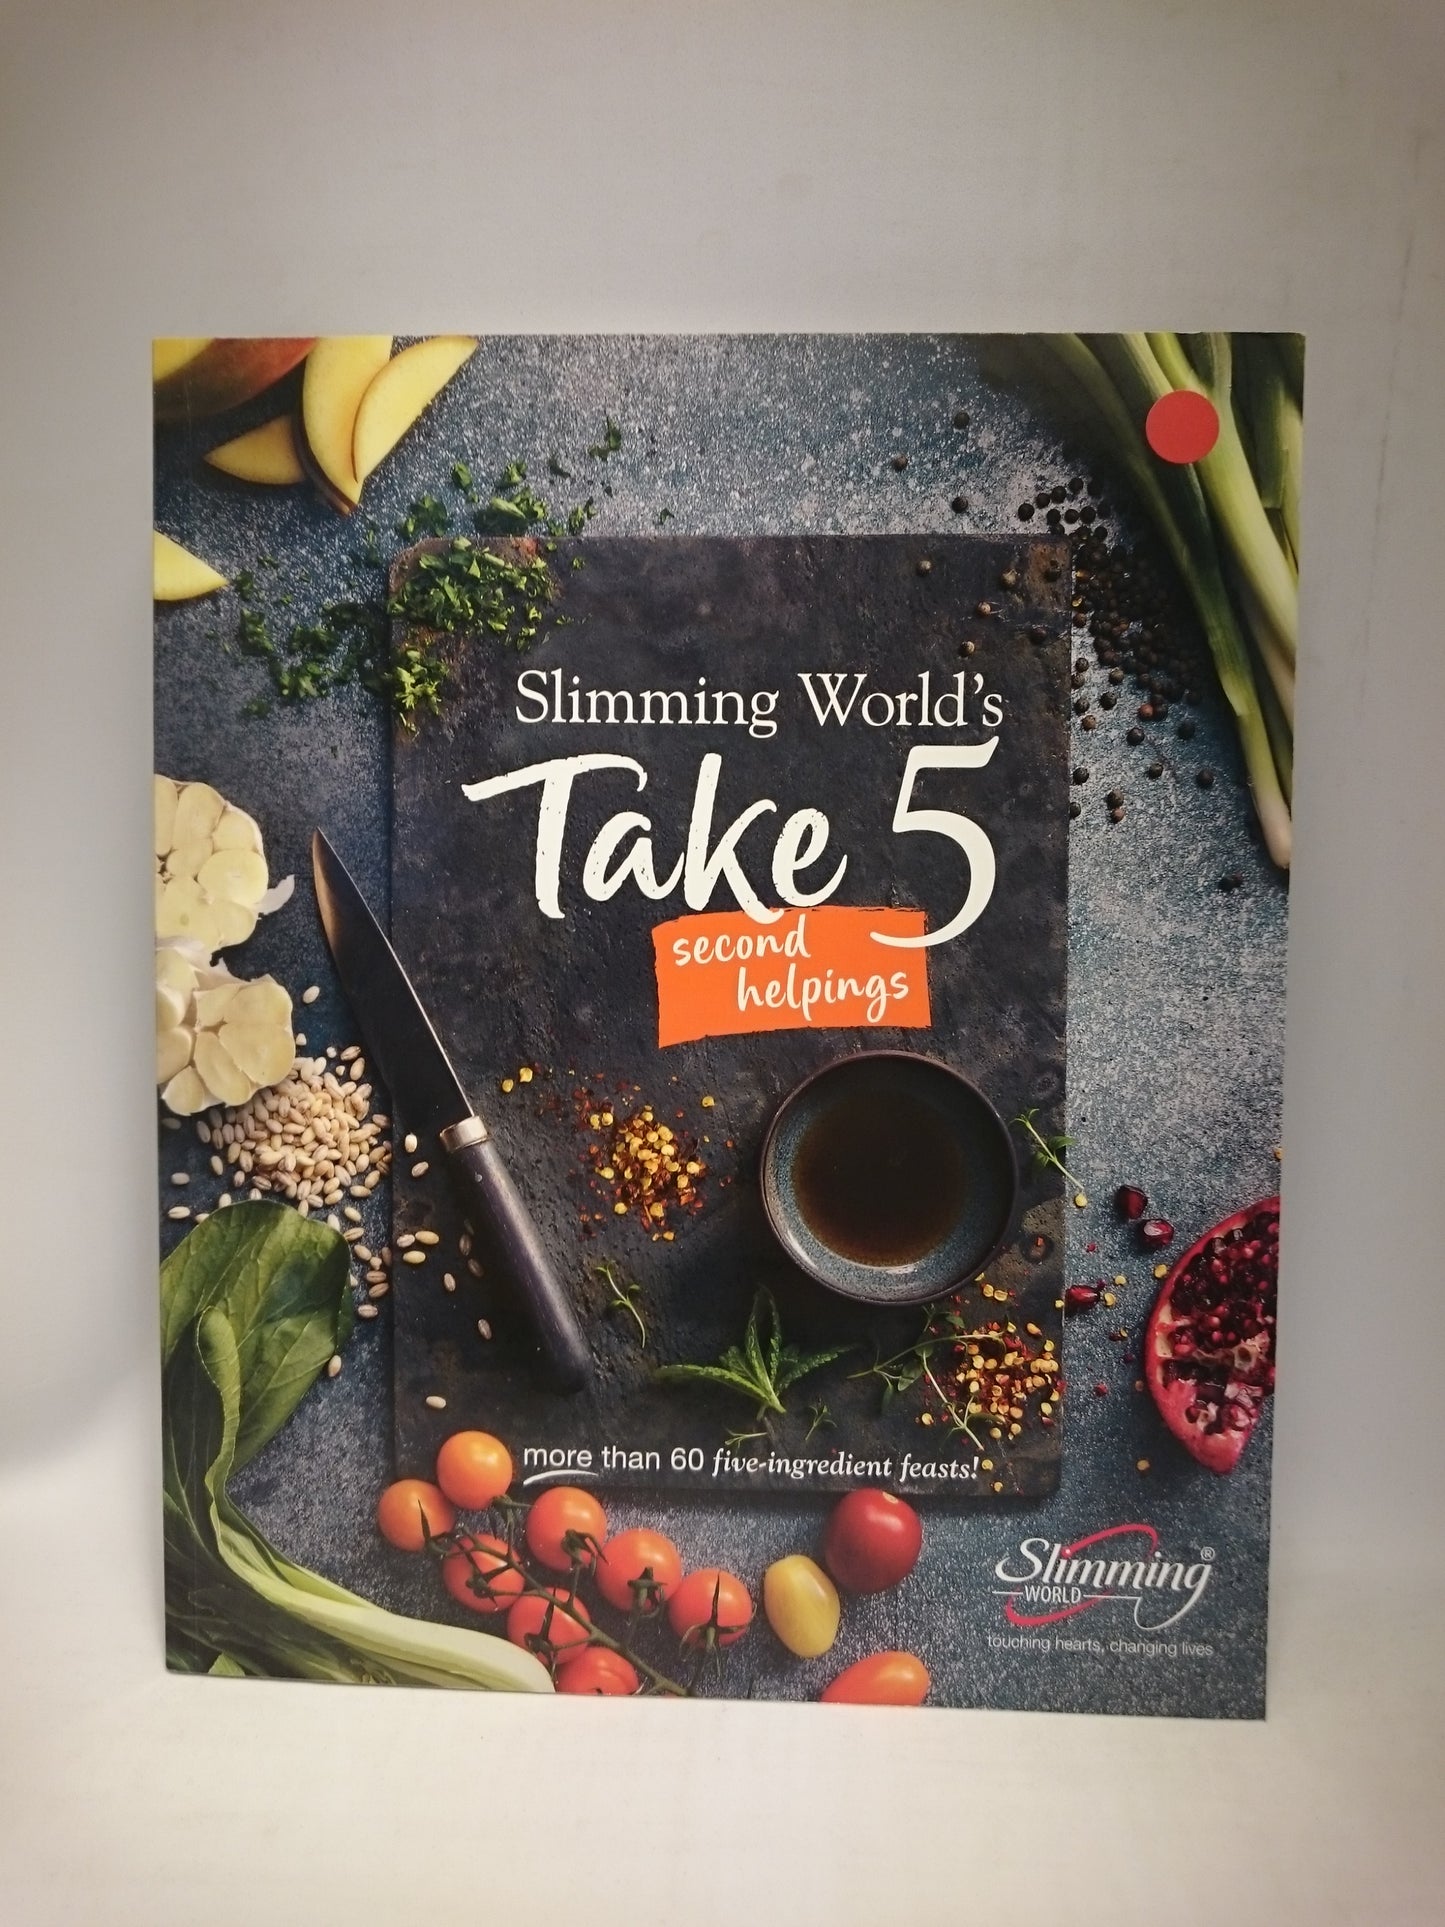 Slimming World's Take 5 second helpings